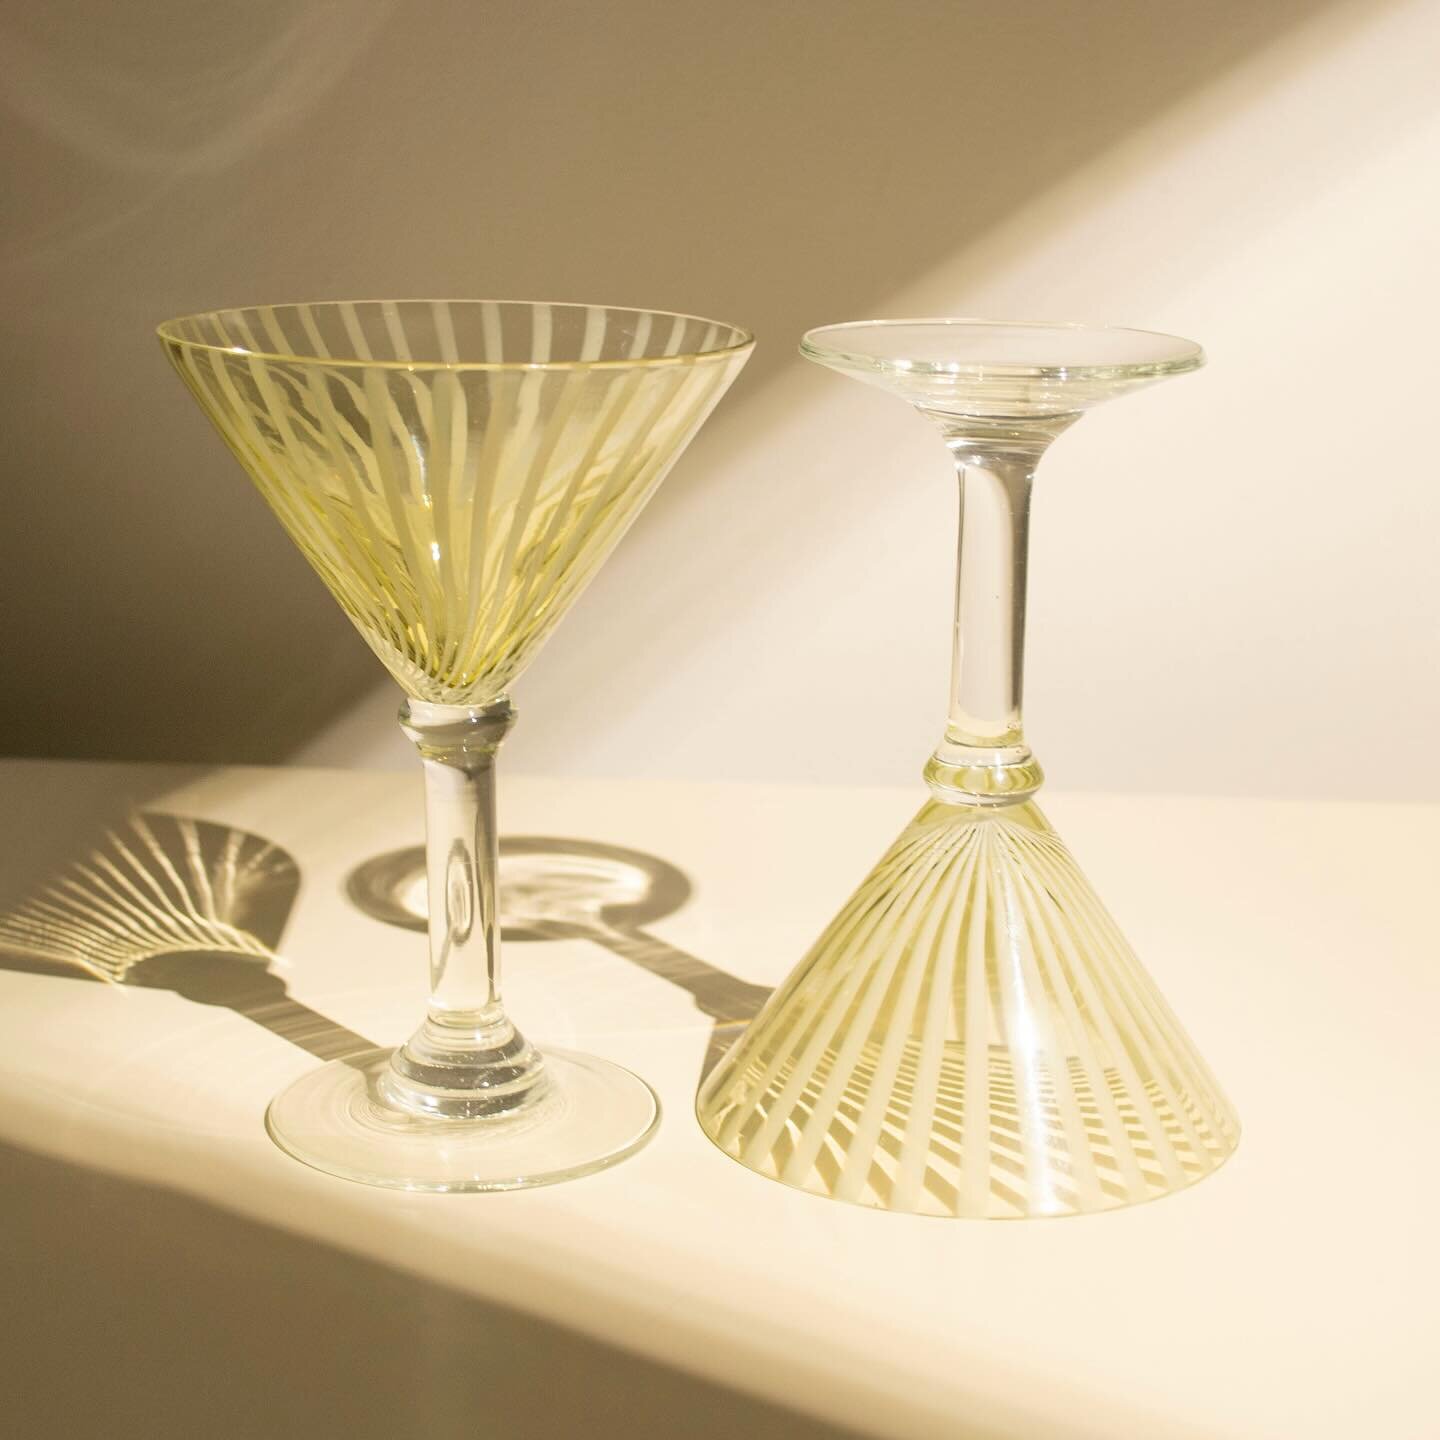 Set of two hand blown clear and ivory striped martini glasses. A favorite find of ours 🤍

$45 + shipping

Purchase on our website (link in bio) or dm with email and zipcode. US shipping or free local Brooklyn pickup available.